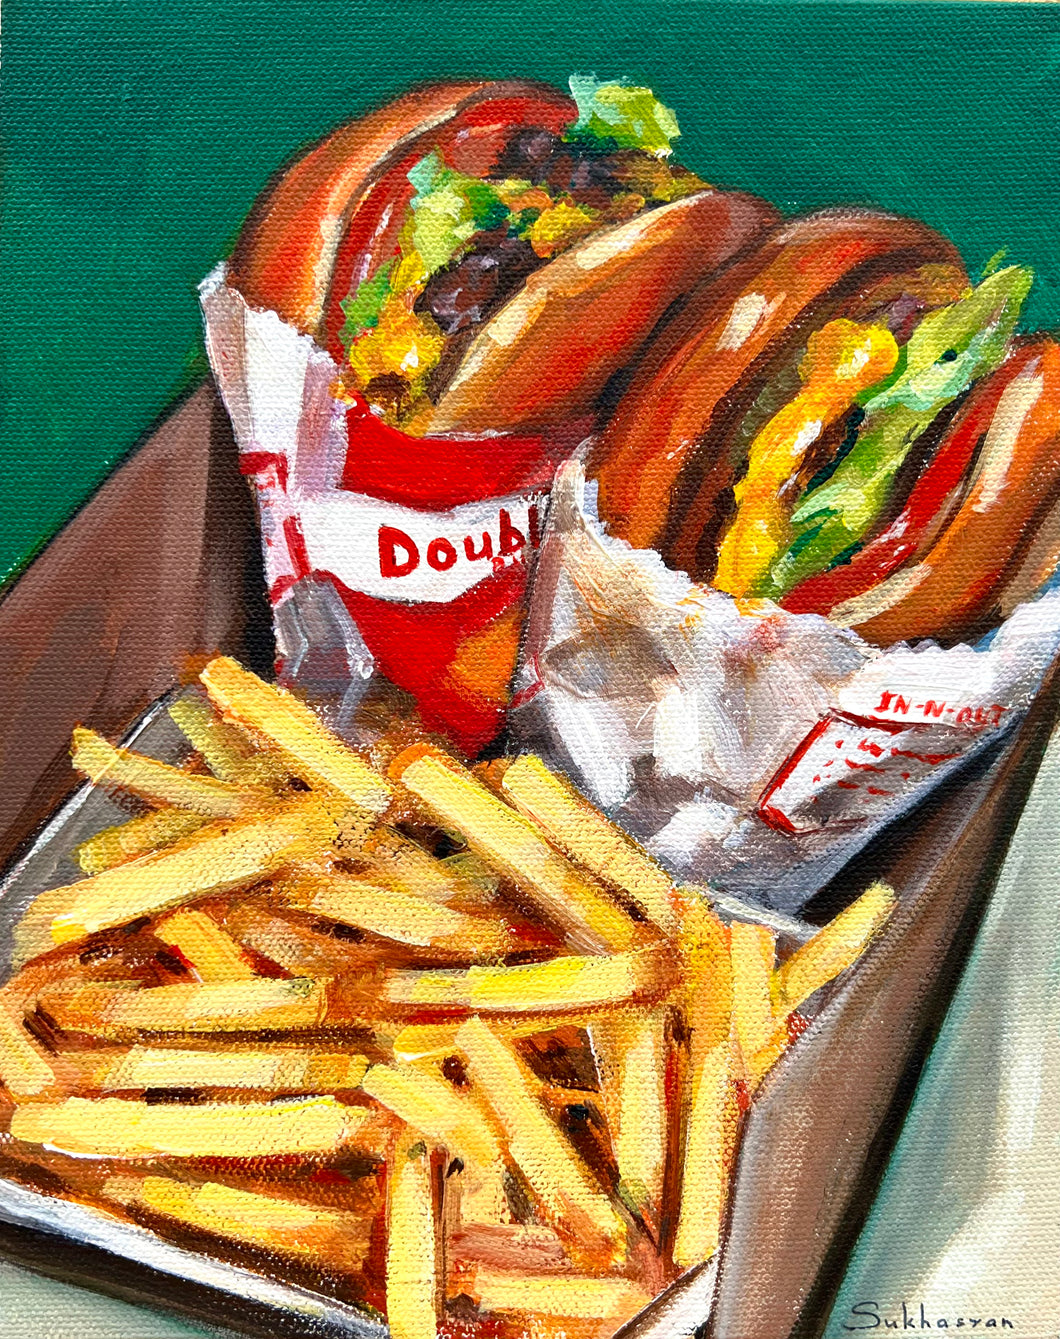 Archival giclée print of the Original acrylic painting Still life with 2 In-N-Out Burgers and French Fries by Victoria Sukhasyan.